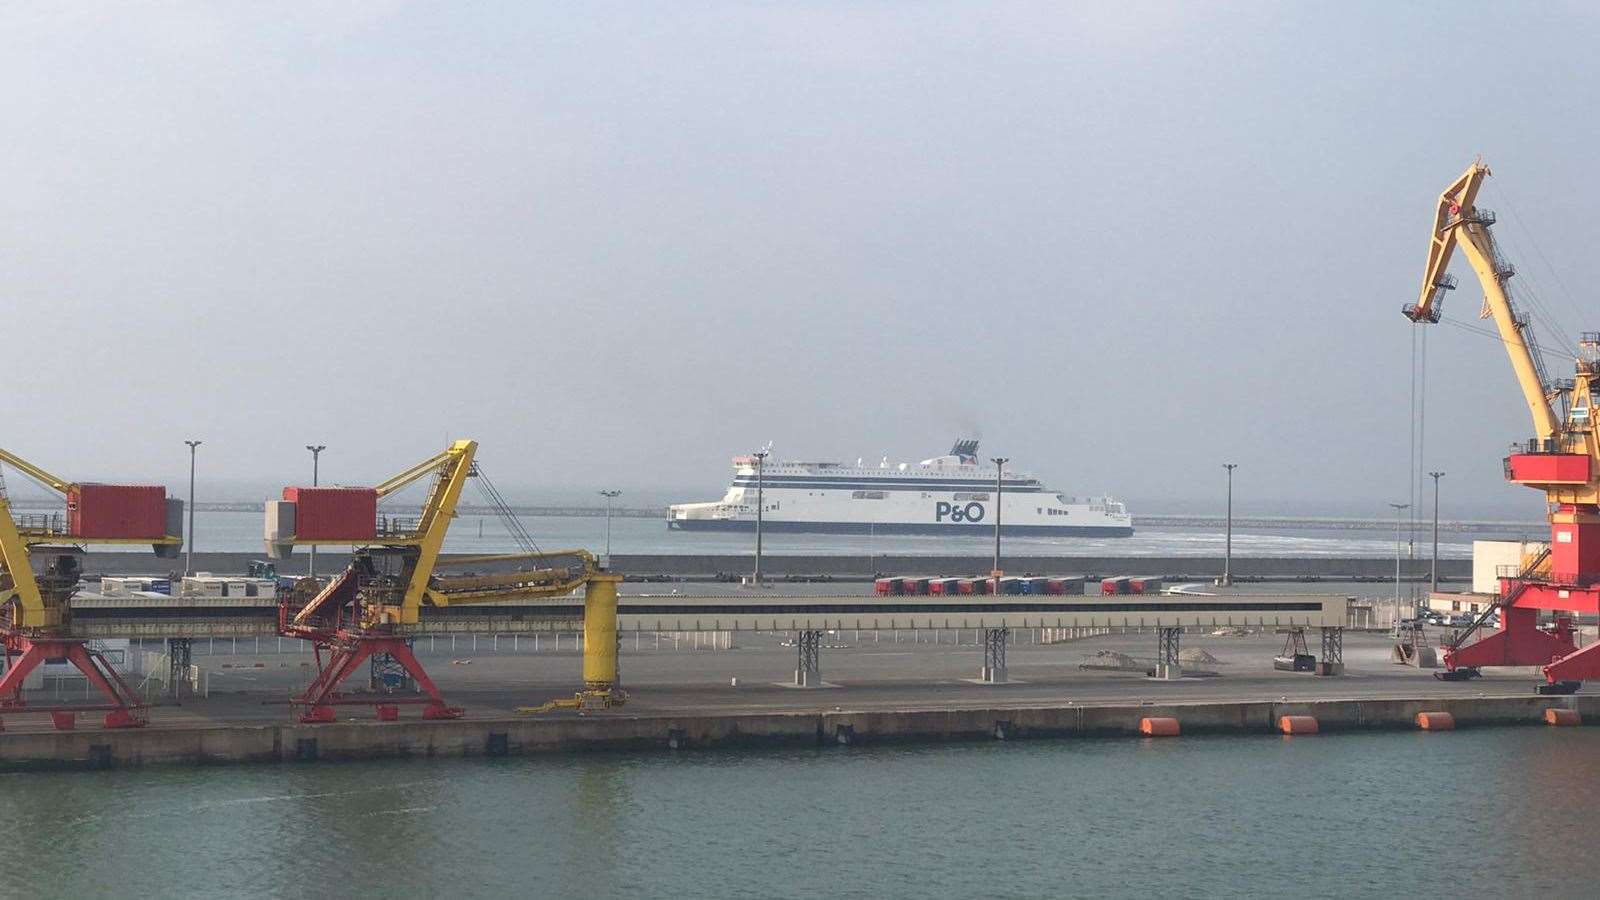 Spirit of Britain pictured leaving Calais for Dover this morning after its first cross-Channel sailing since the sacking of 800 seafarers